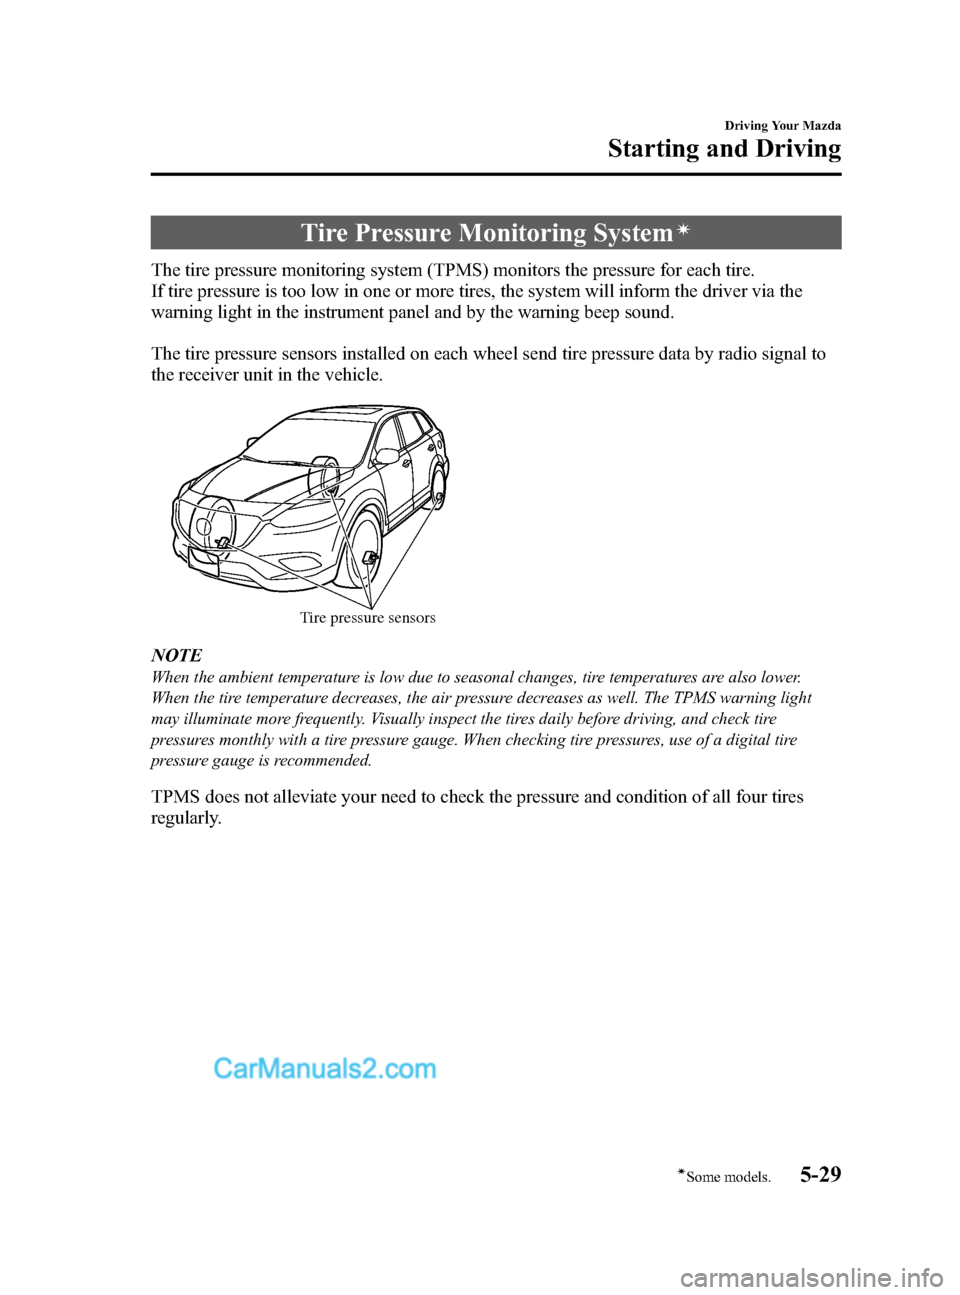 MAZDA MODEL CX-9 2015  Owners Manual (in English) Black plate (207,1)
Tire Pressure Monitoring Systemí
The tire pressure monitoring system (TPMS) monitors the pressure for each tire.
If tire pressure is too low in one or more tires, the system will 